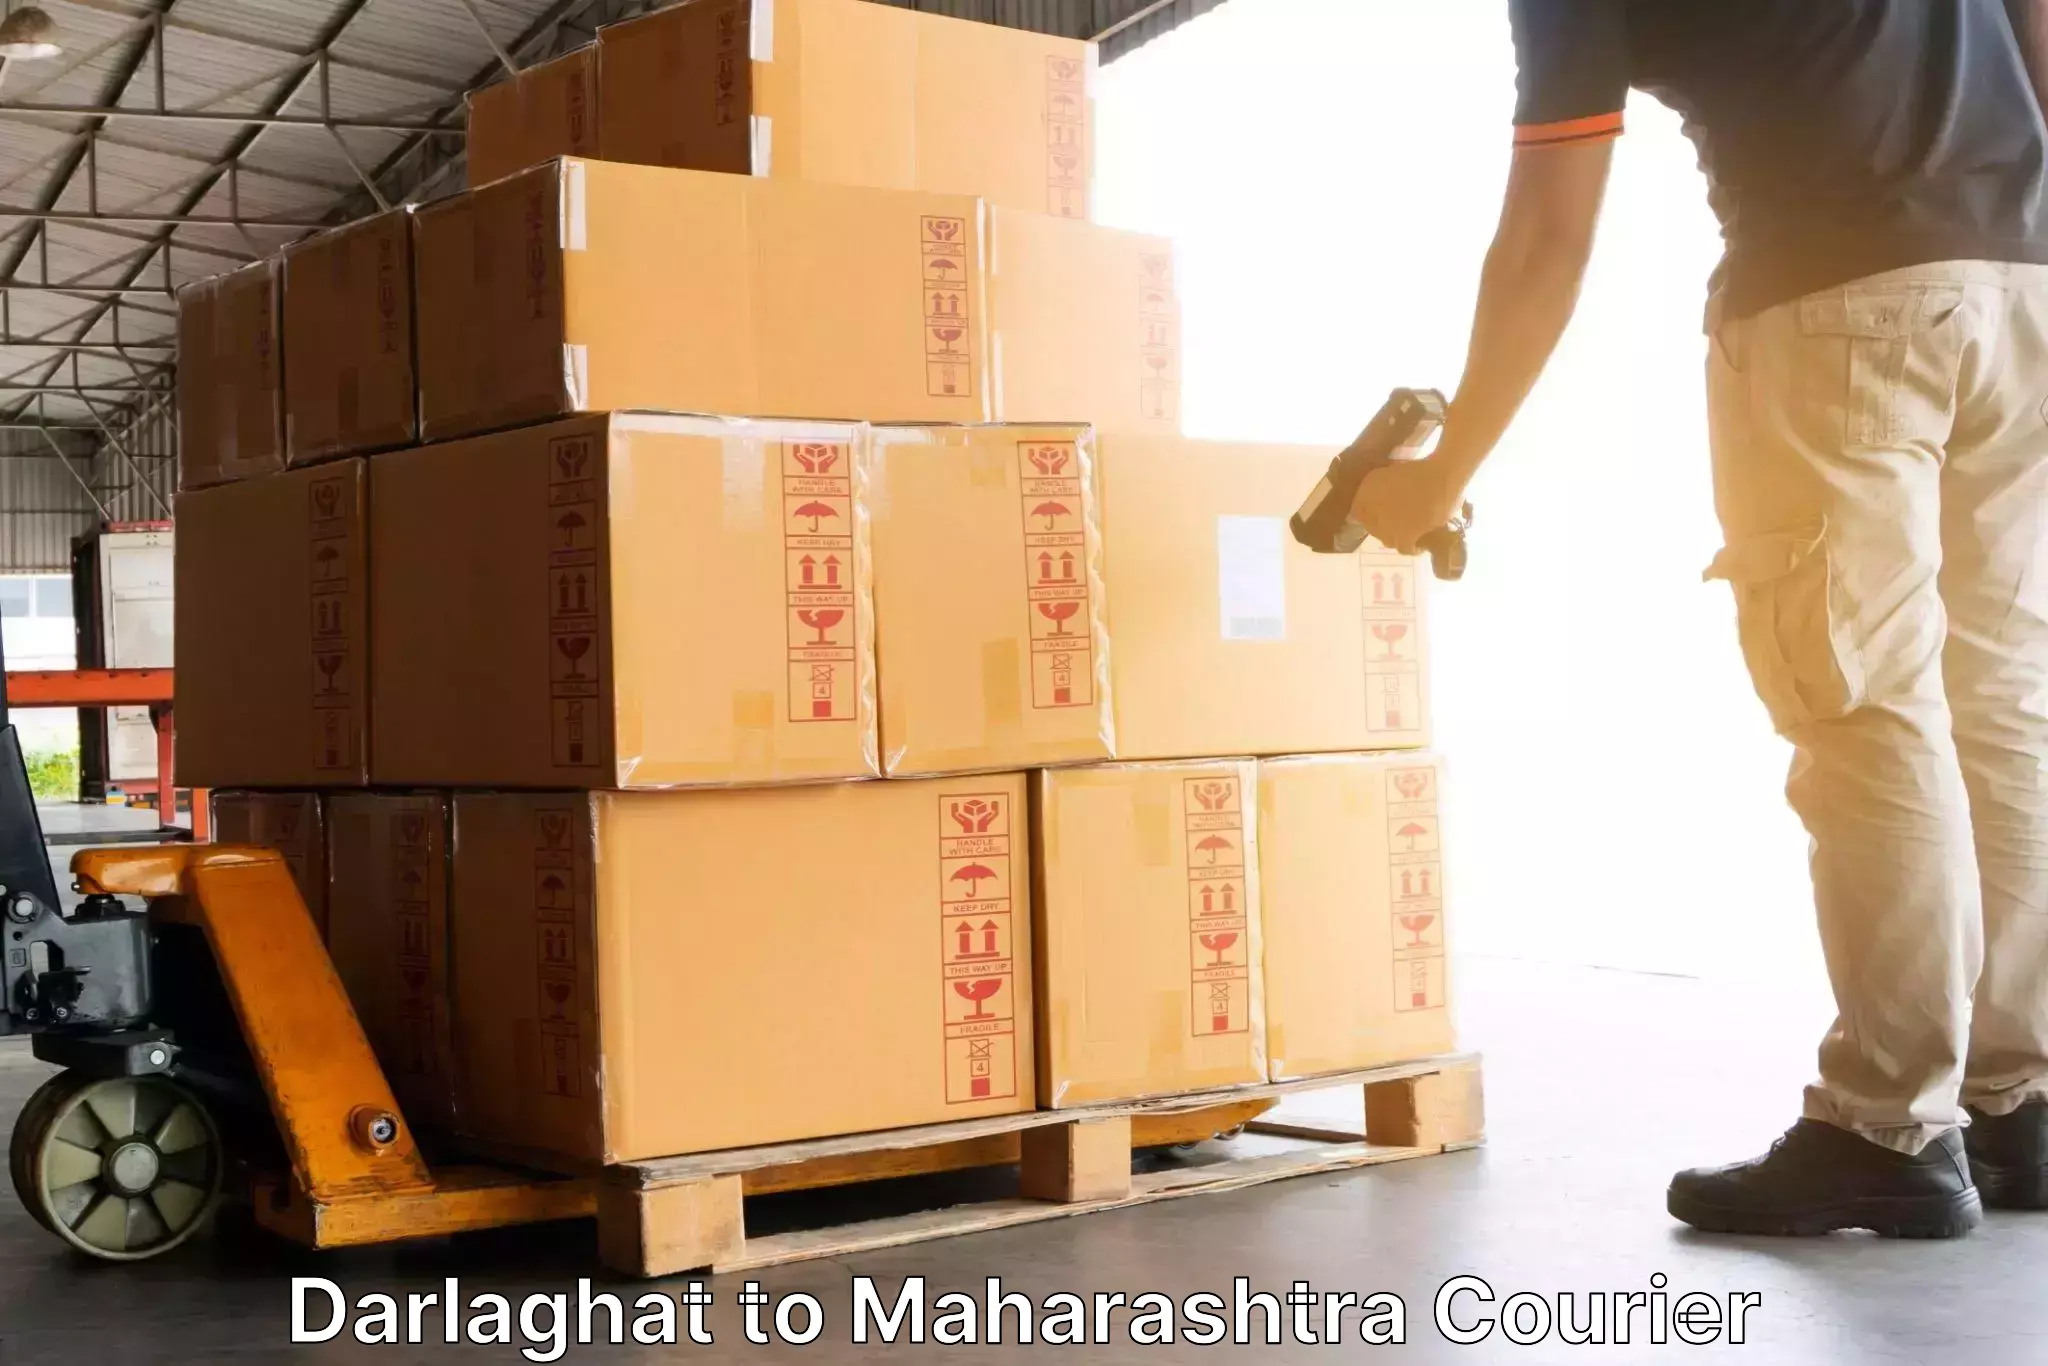 Same-day delivery solutions Darlaghat to Sangameshwar